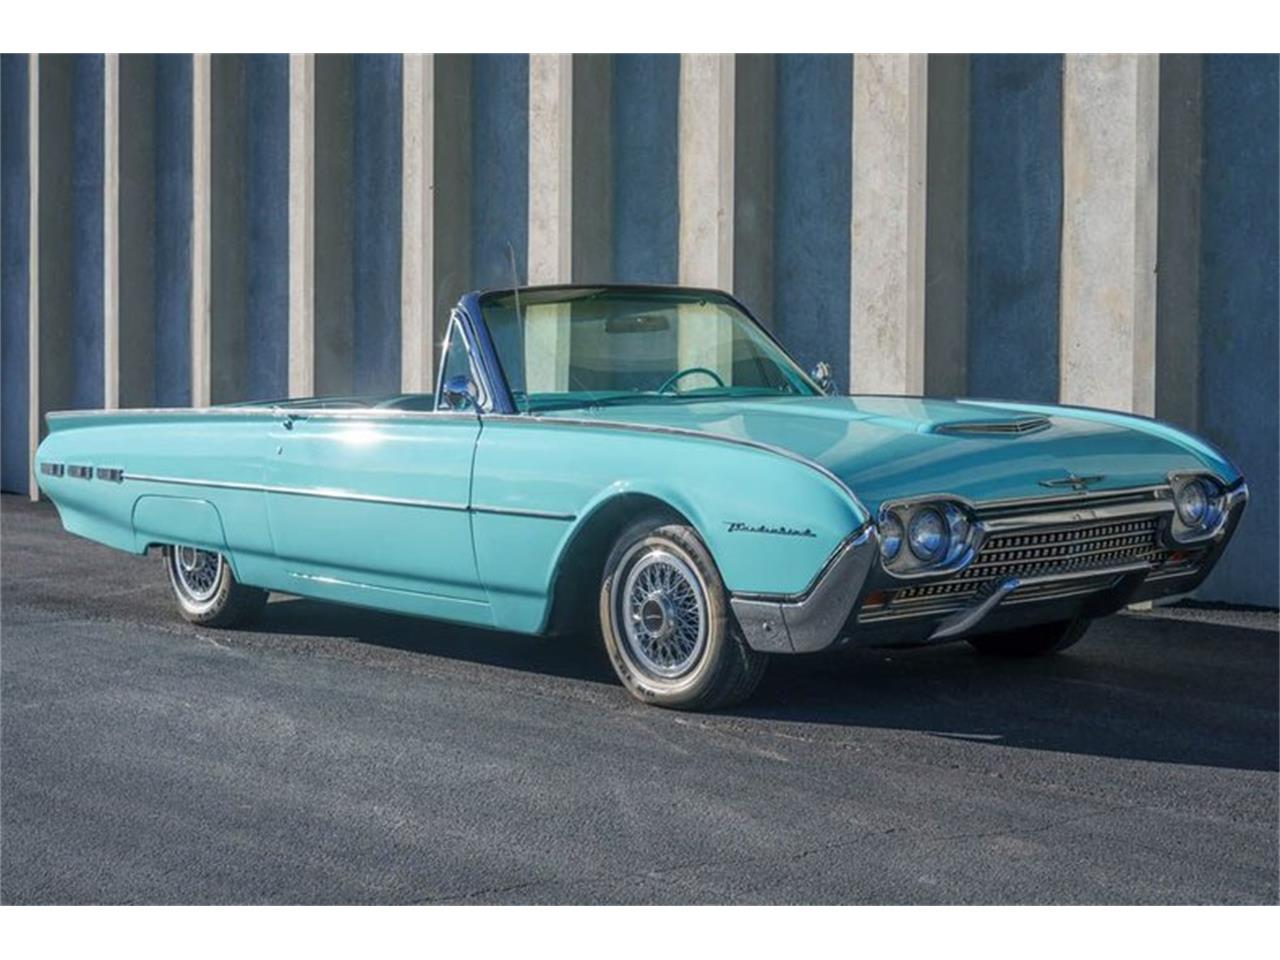 For Sale: 1962 Ford Thunderbird in St. Louis, Missouri for sale in Saint Louis, MO